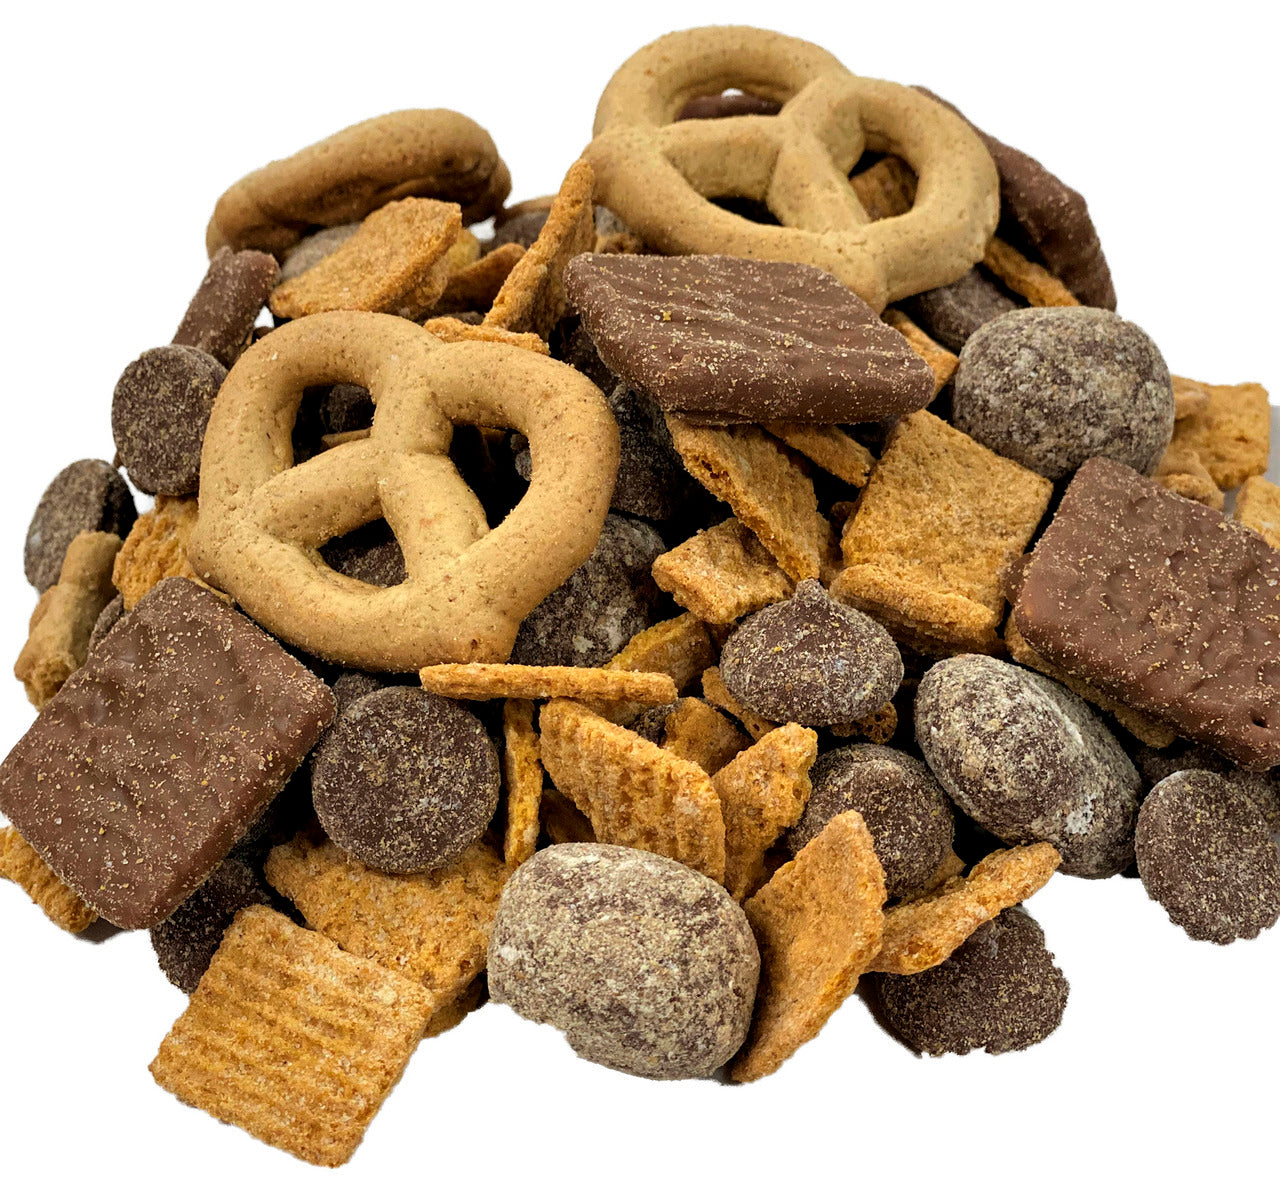 S'mores snack mix